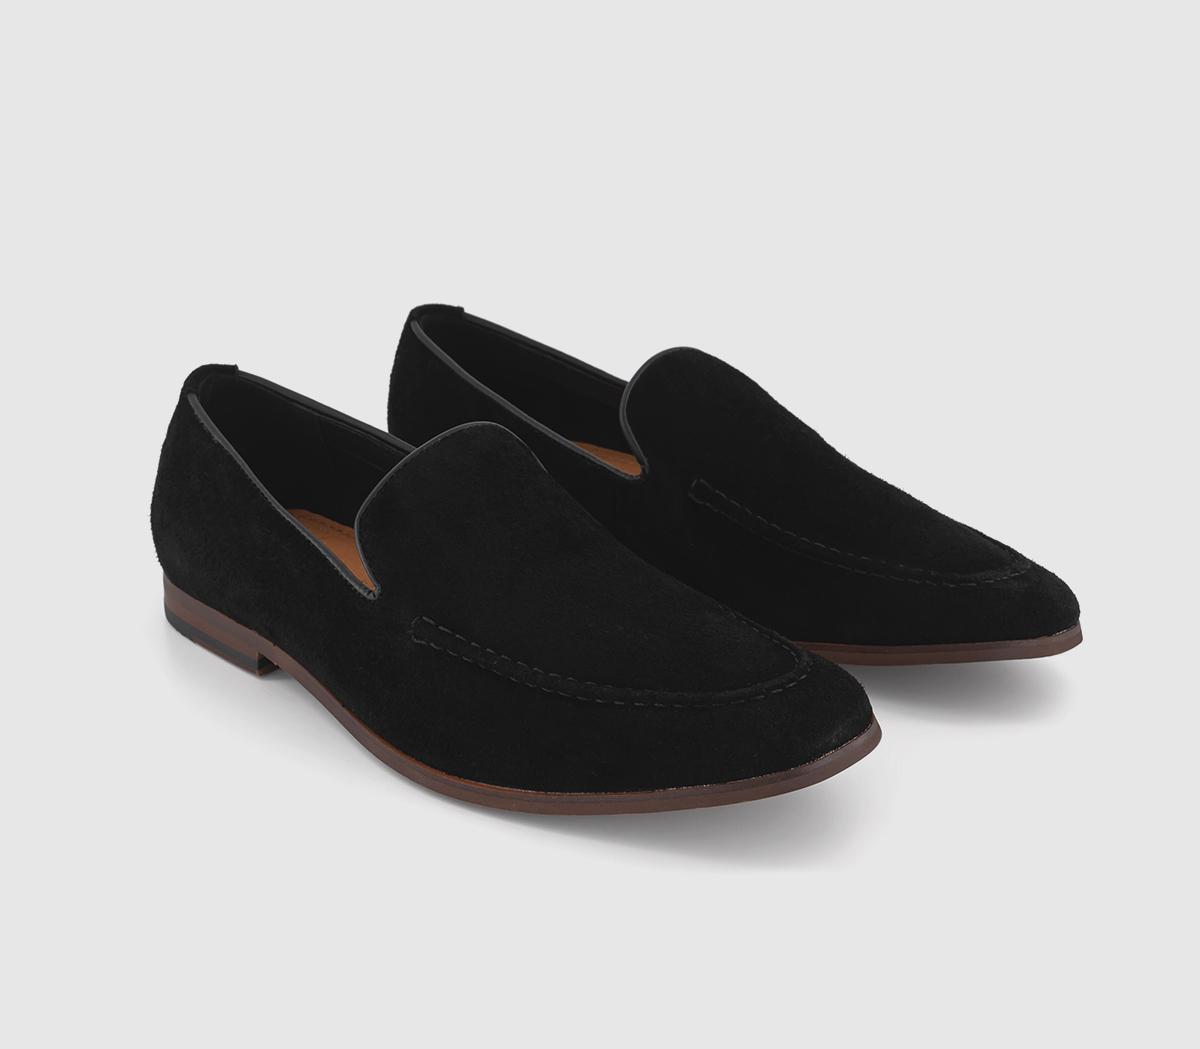 OFFICE Mens Cody Slip On Loafers Black Suede, 7